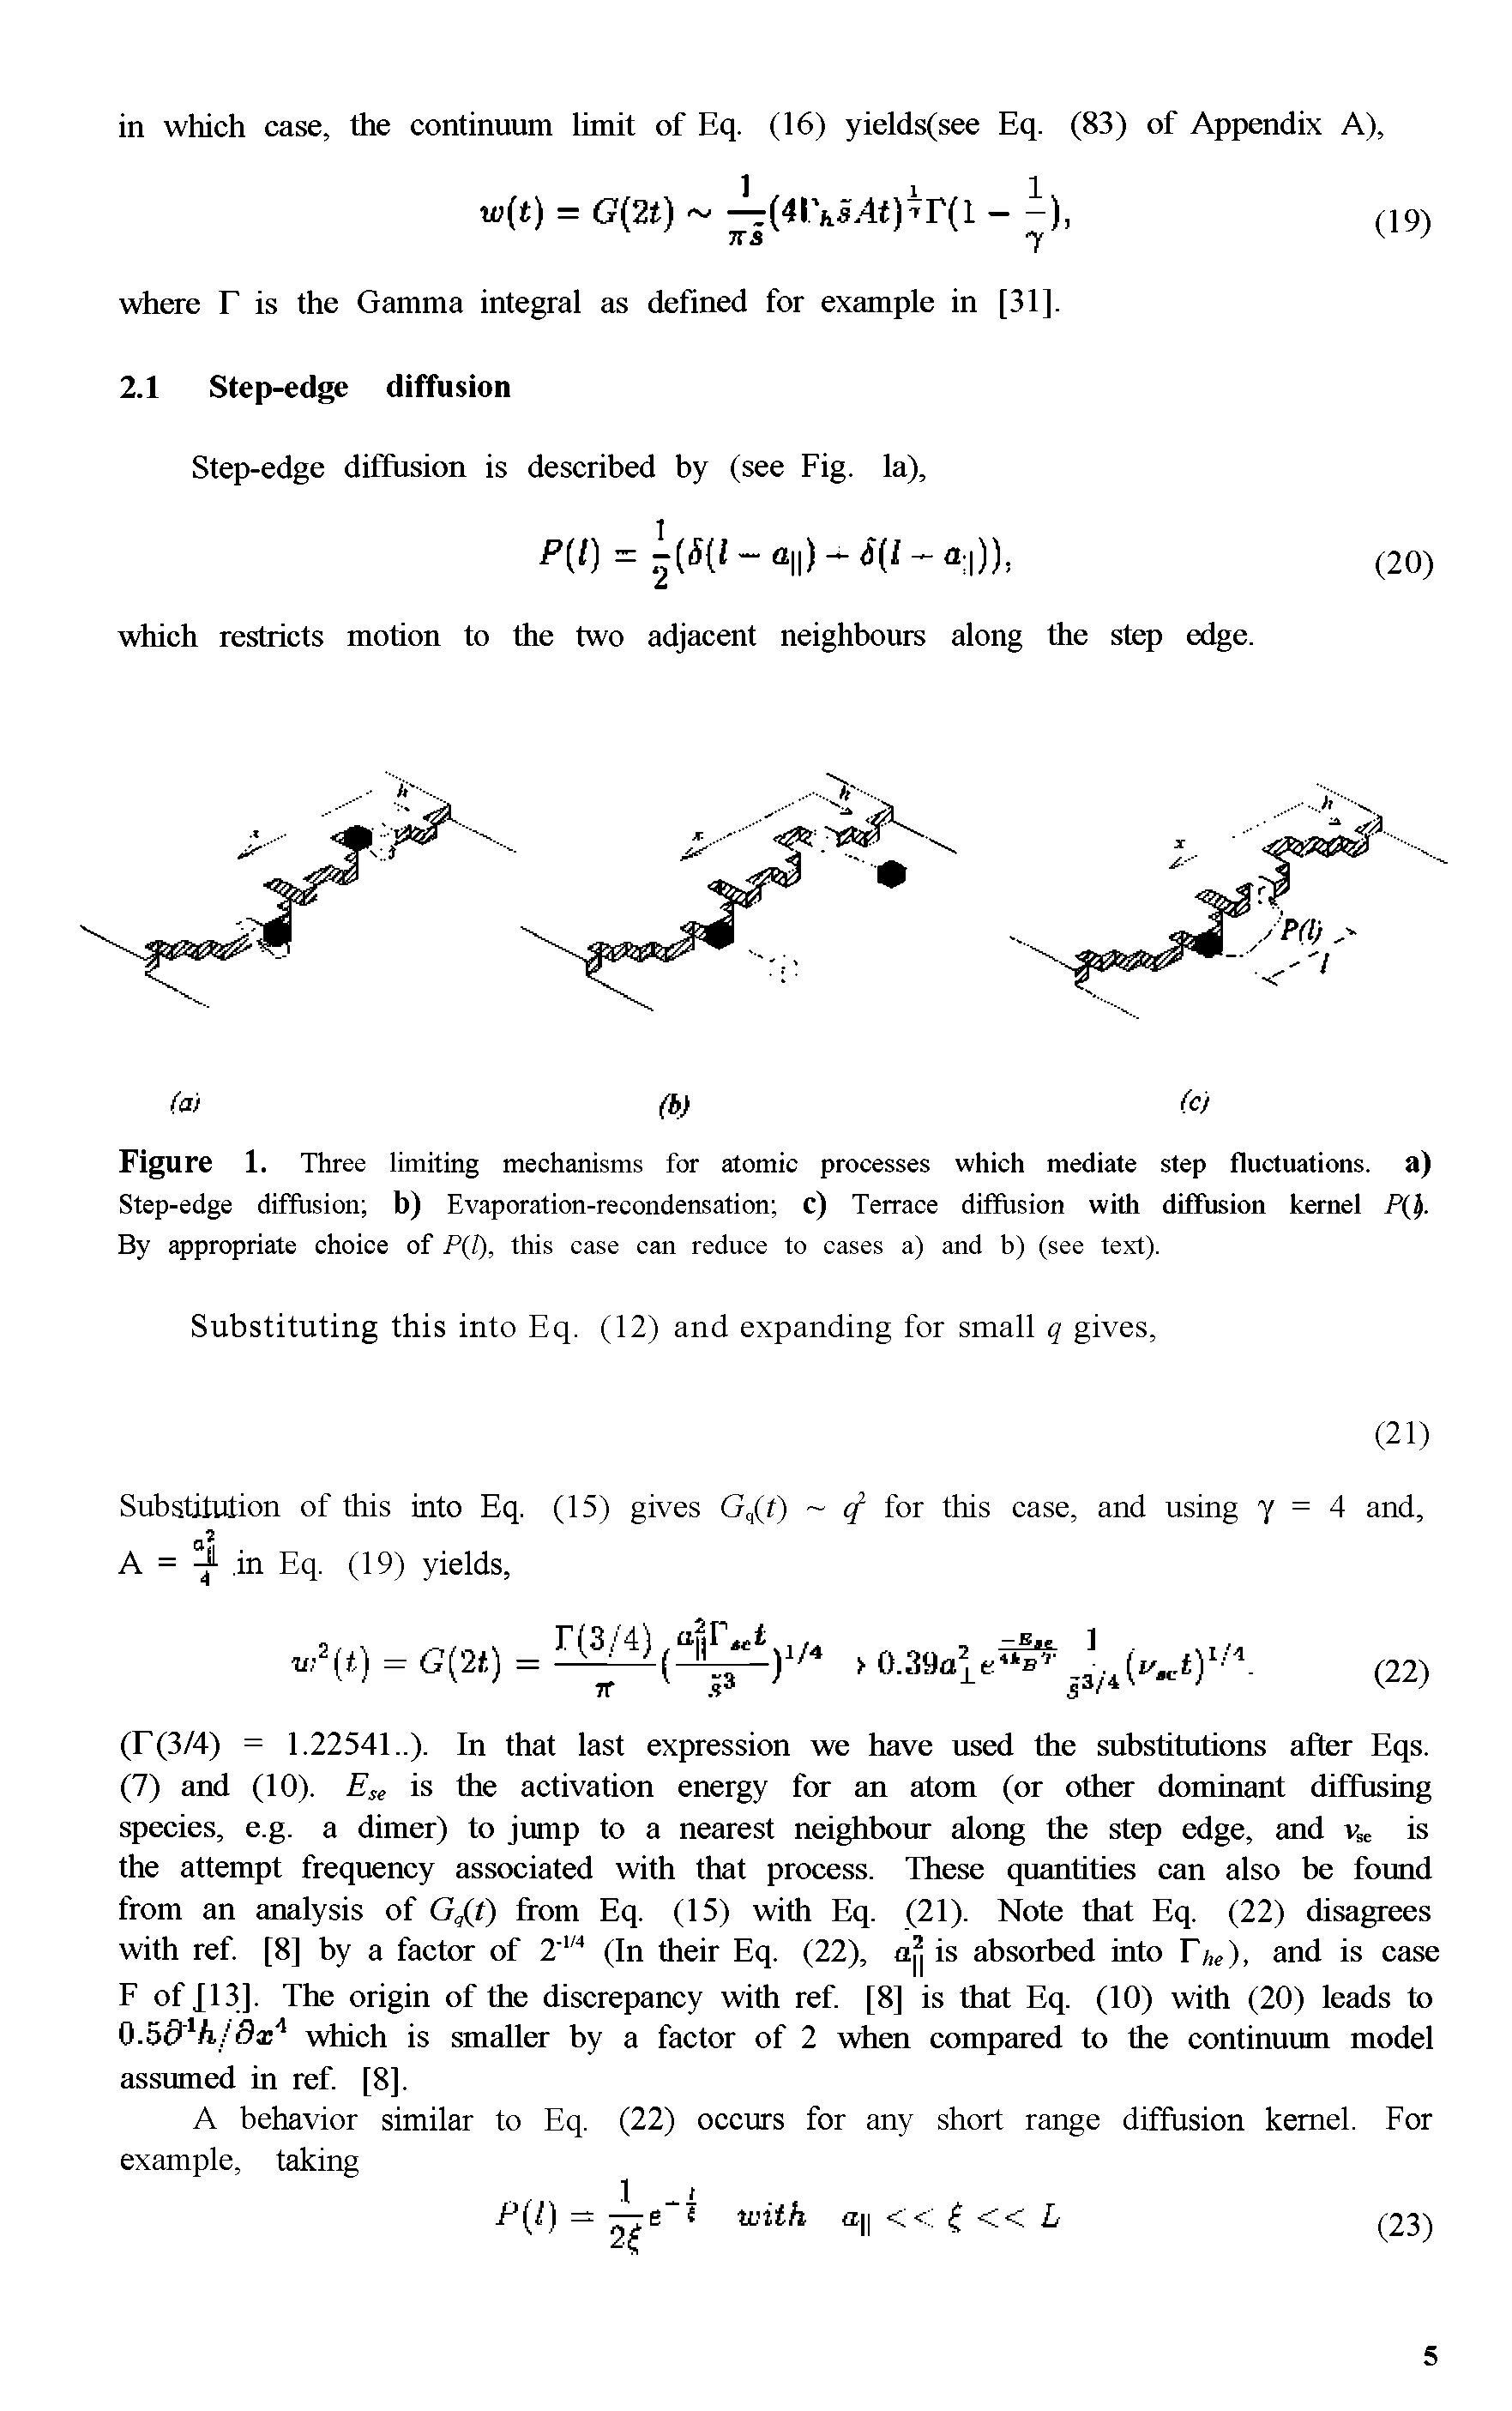 Figure 1. Three limiting mechanisms for atomic processes which mediate step fluctuations, a) Step-edge diffusion b) Evaporation-recondensation c) Terrace diffusion with diffusion kernel P(). By appropriate choice of P(J), this case can reduce to cases a) and b) (see text).